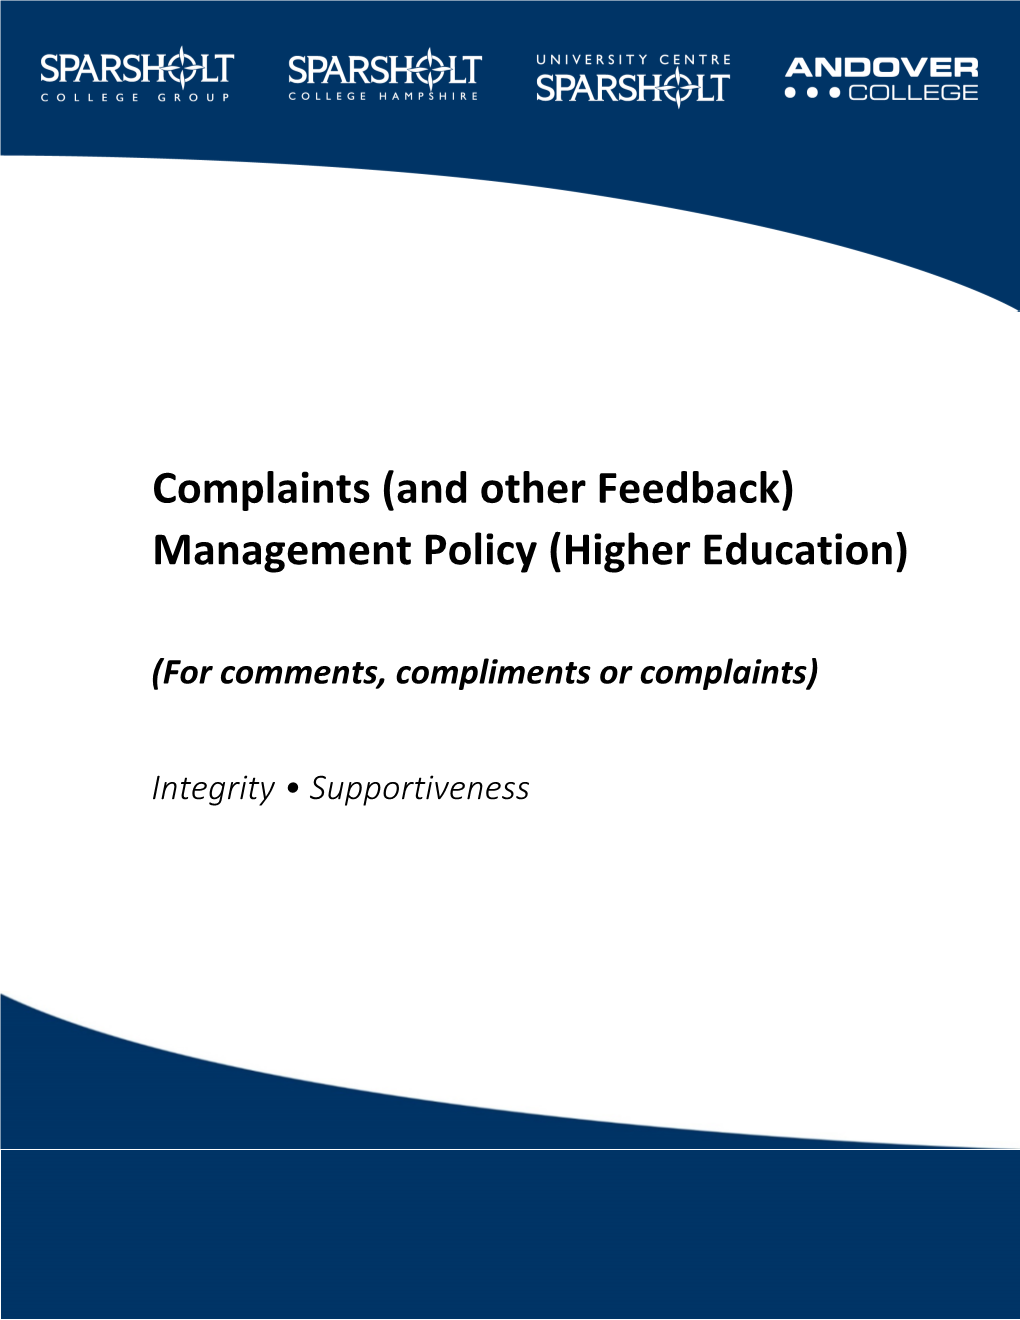 Complaints and Feedback Policy – Higher Education